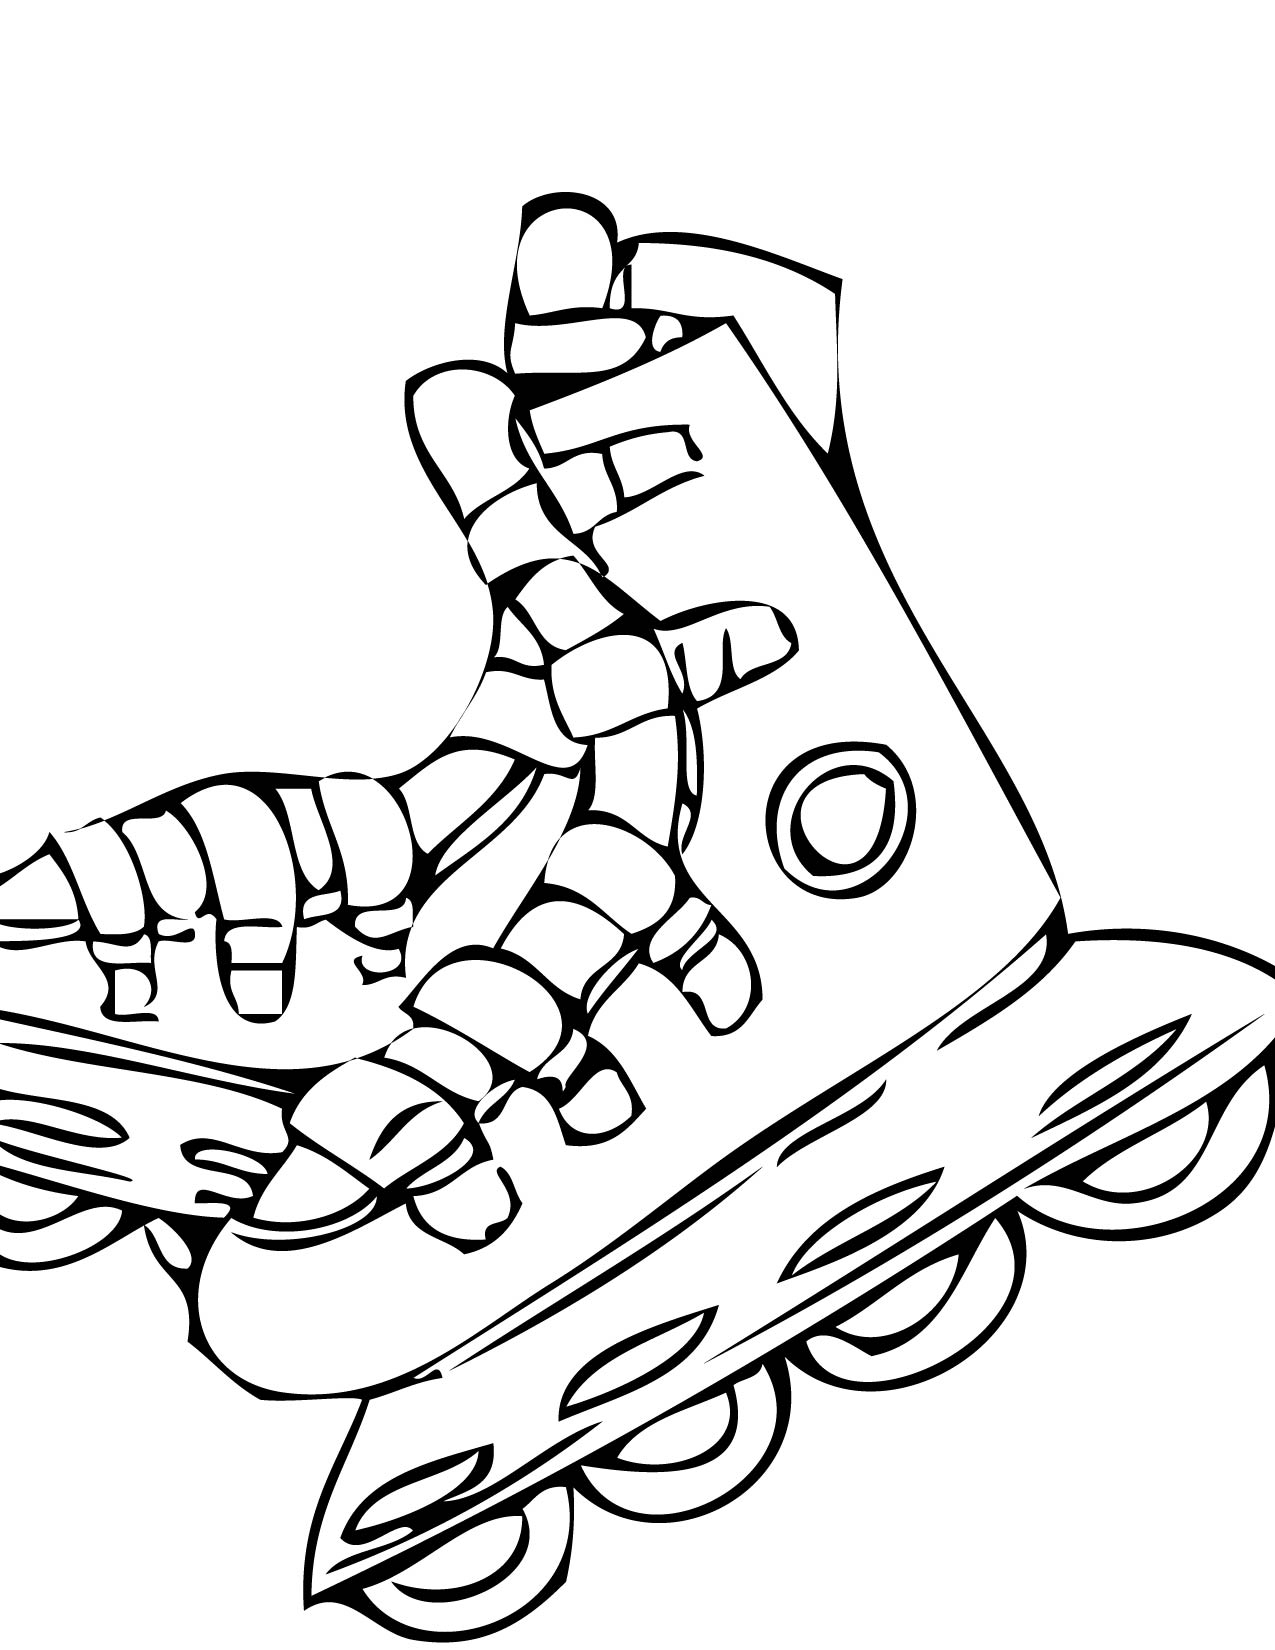 Rollerblade Coloring Pages at GetColorings.com | Free printable